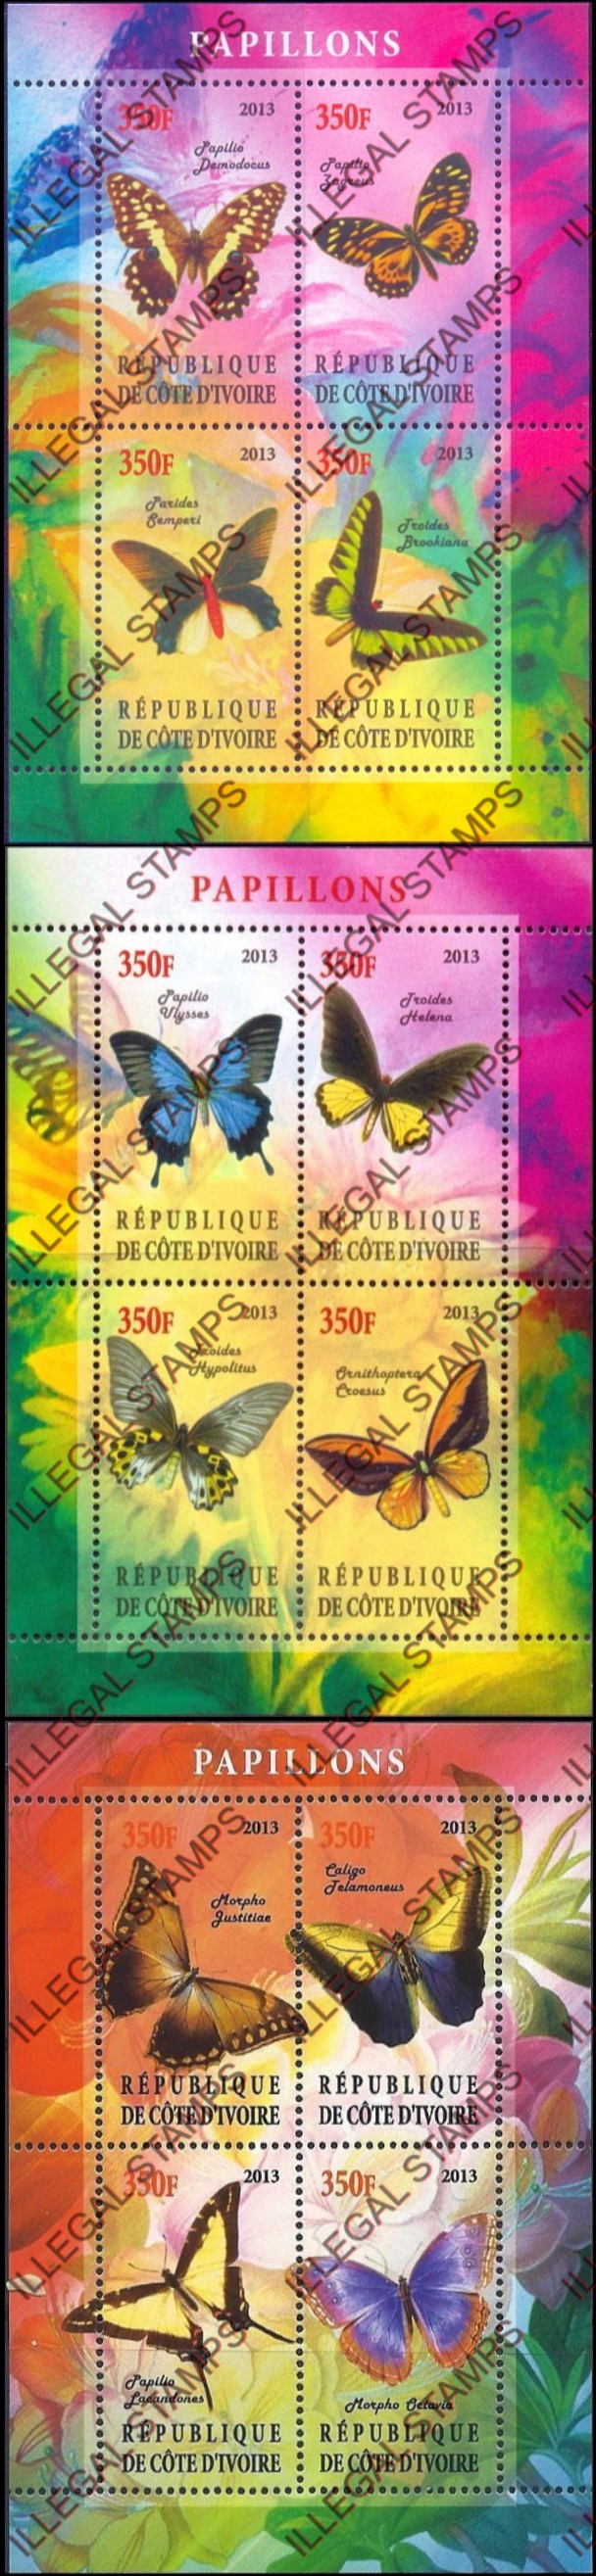 Ivory Coast 2013 Butterflies Illegal Stamp Souvenir Sheets of 4